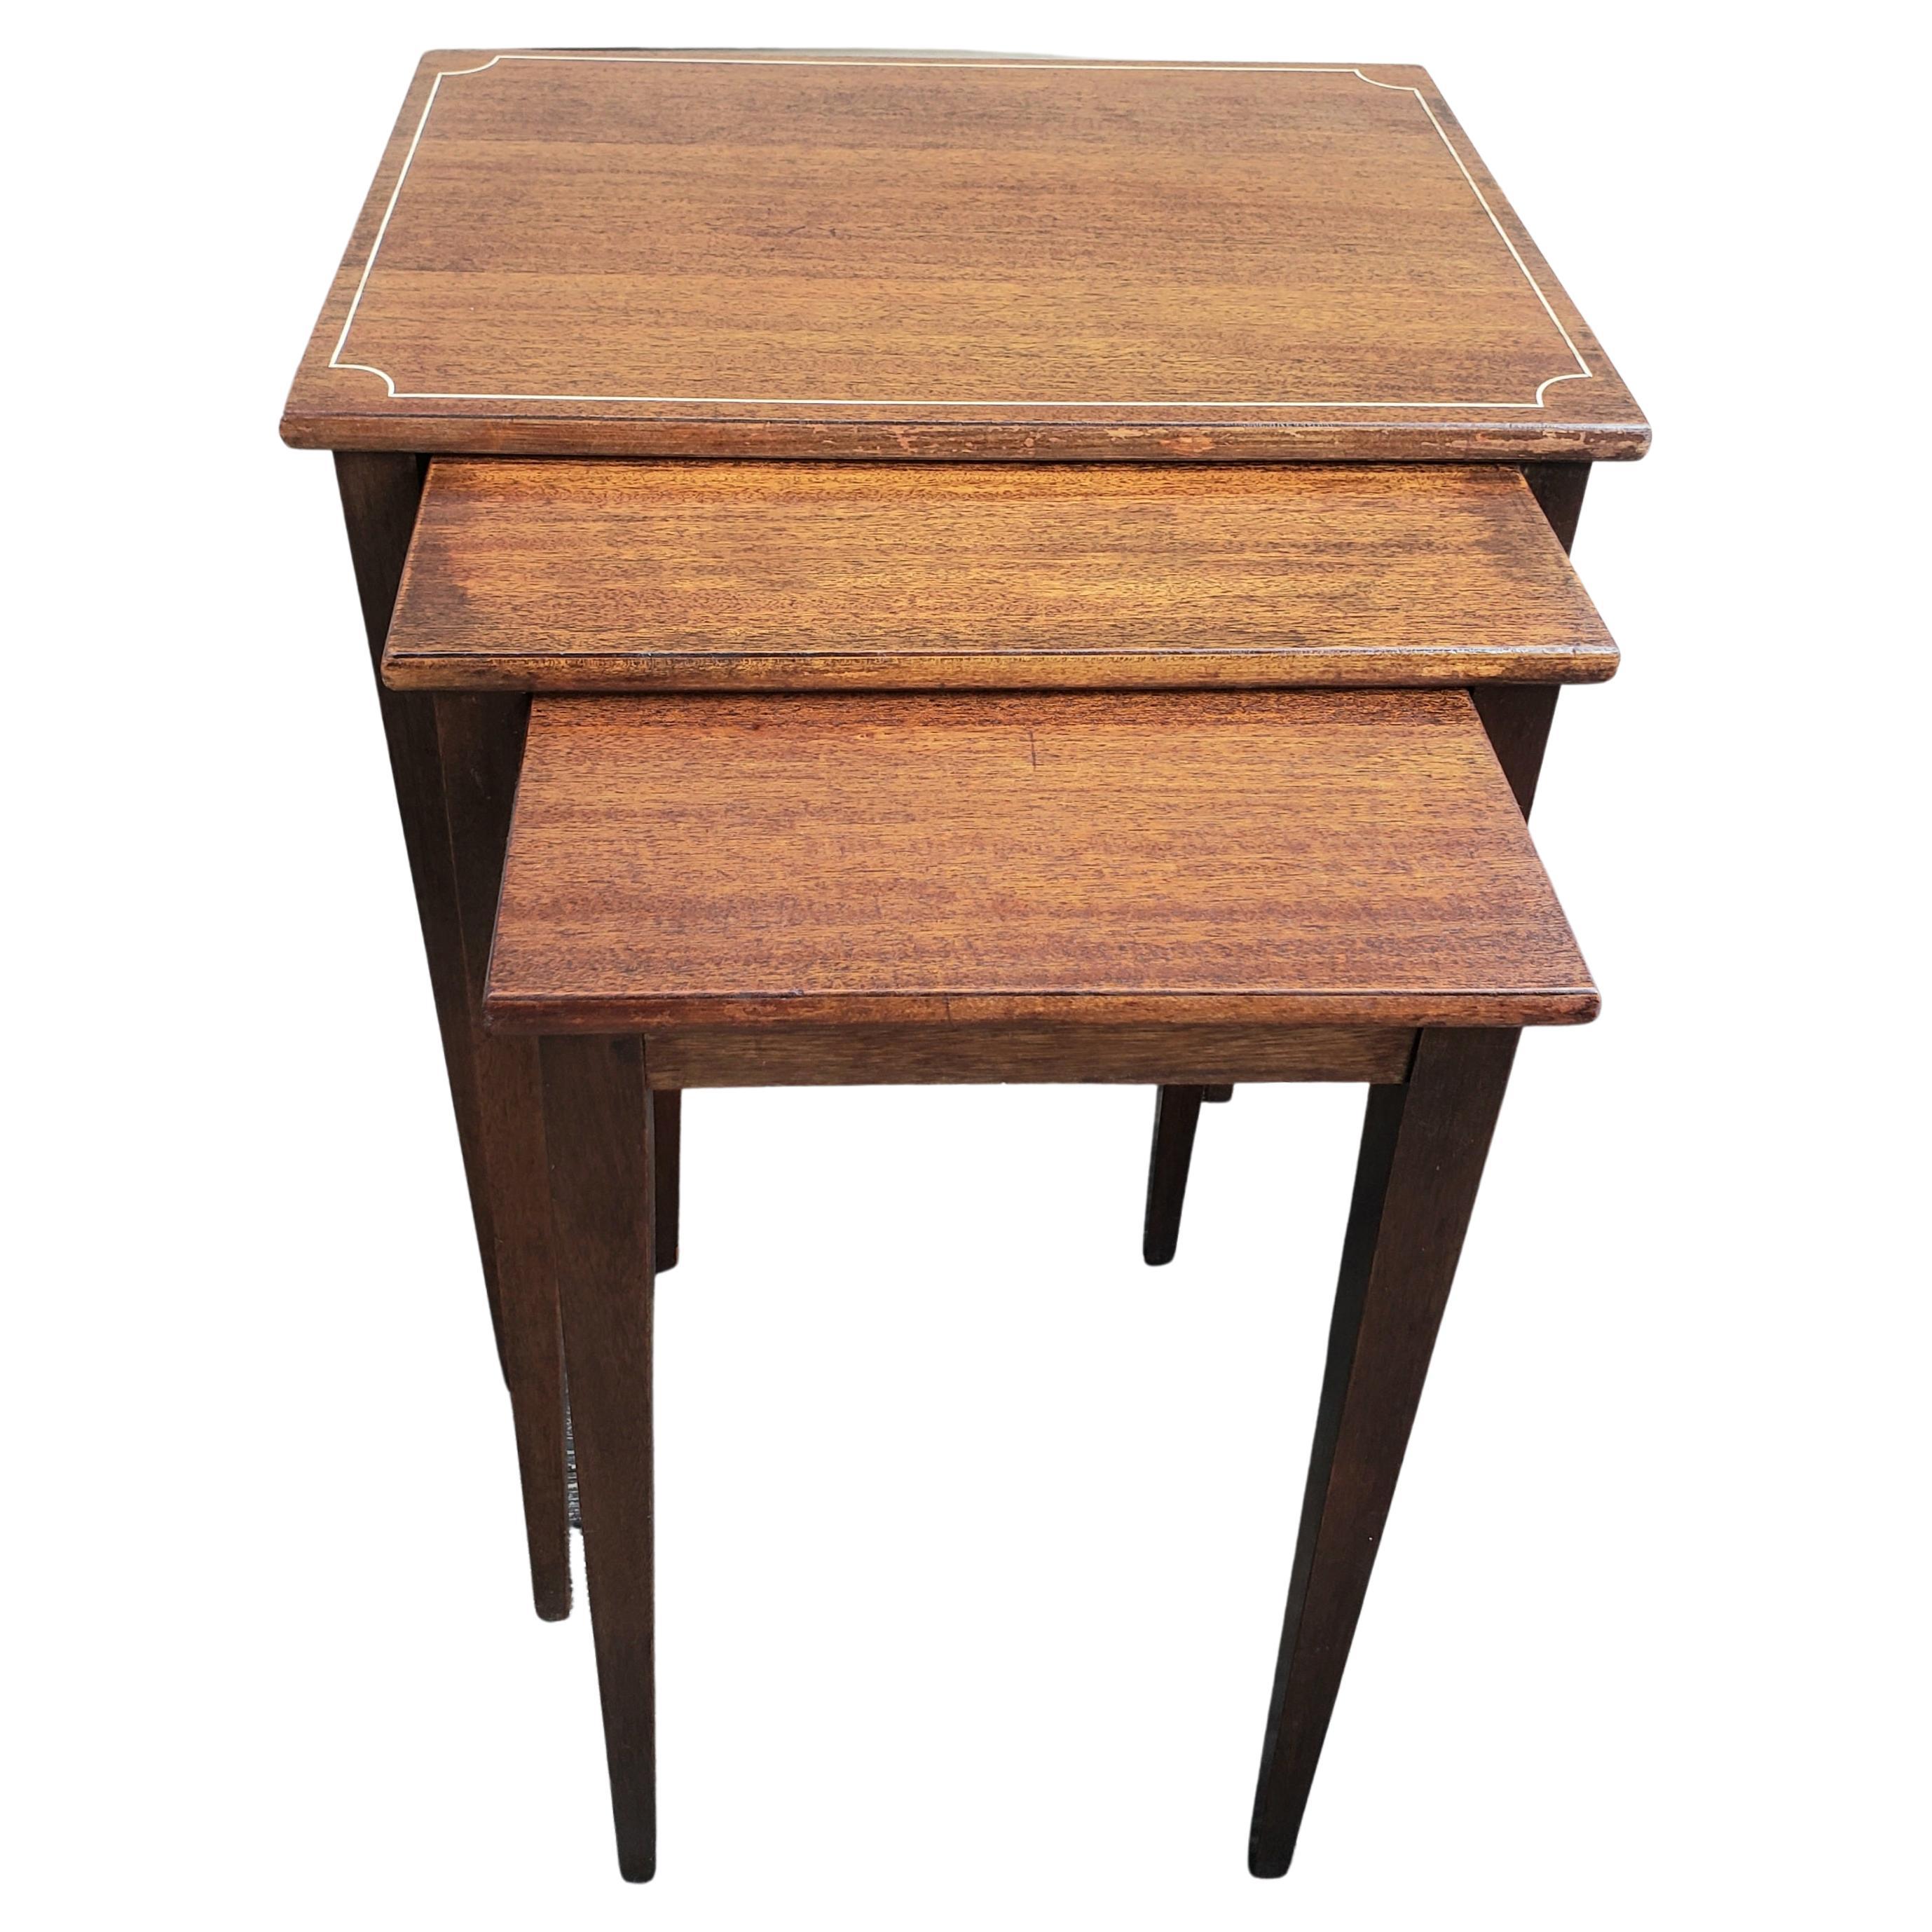 1950s Brandt Fine Furniture Refinished Genuine Mahogany Nesting Tables In Excellent Condition For Sale In Germantown, MD